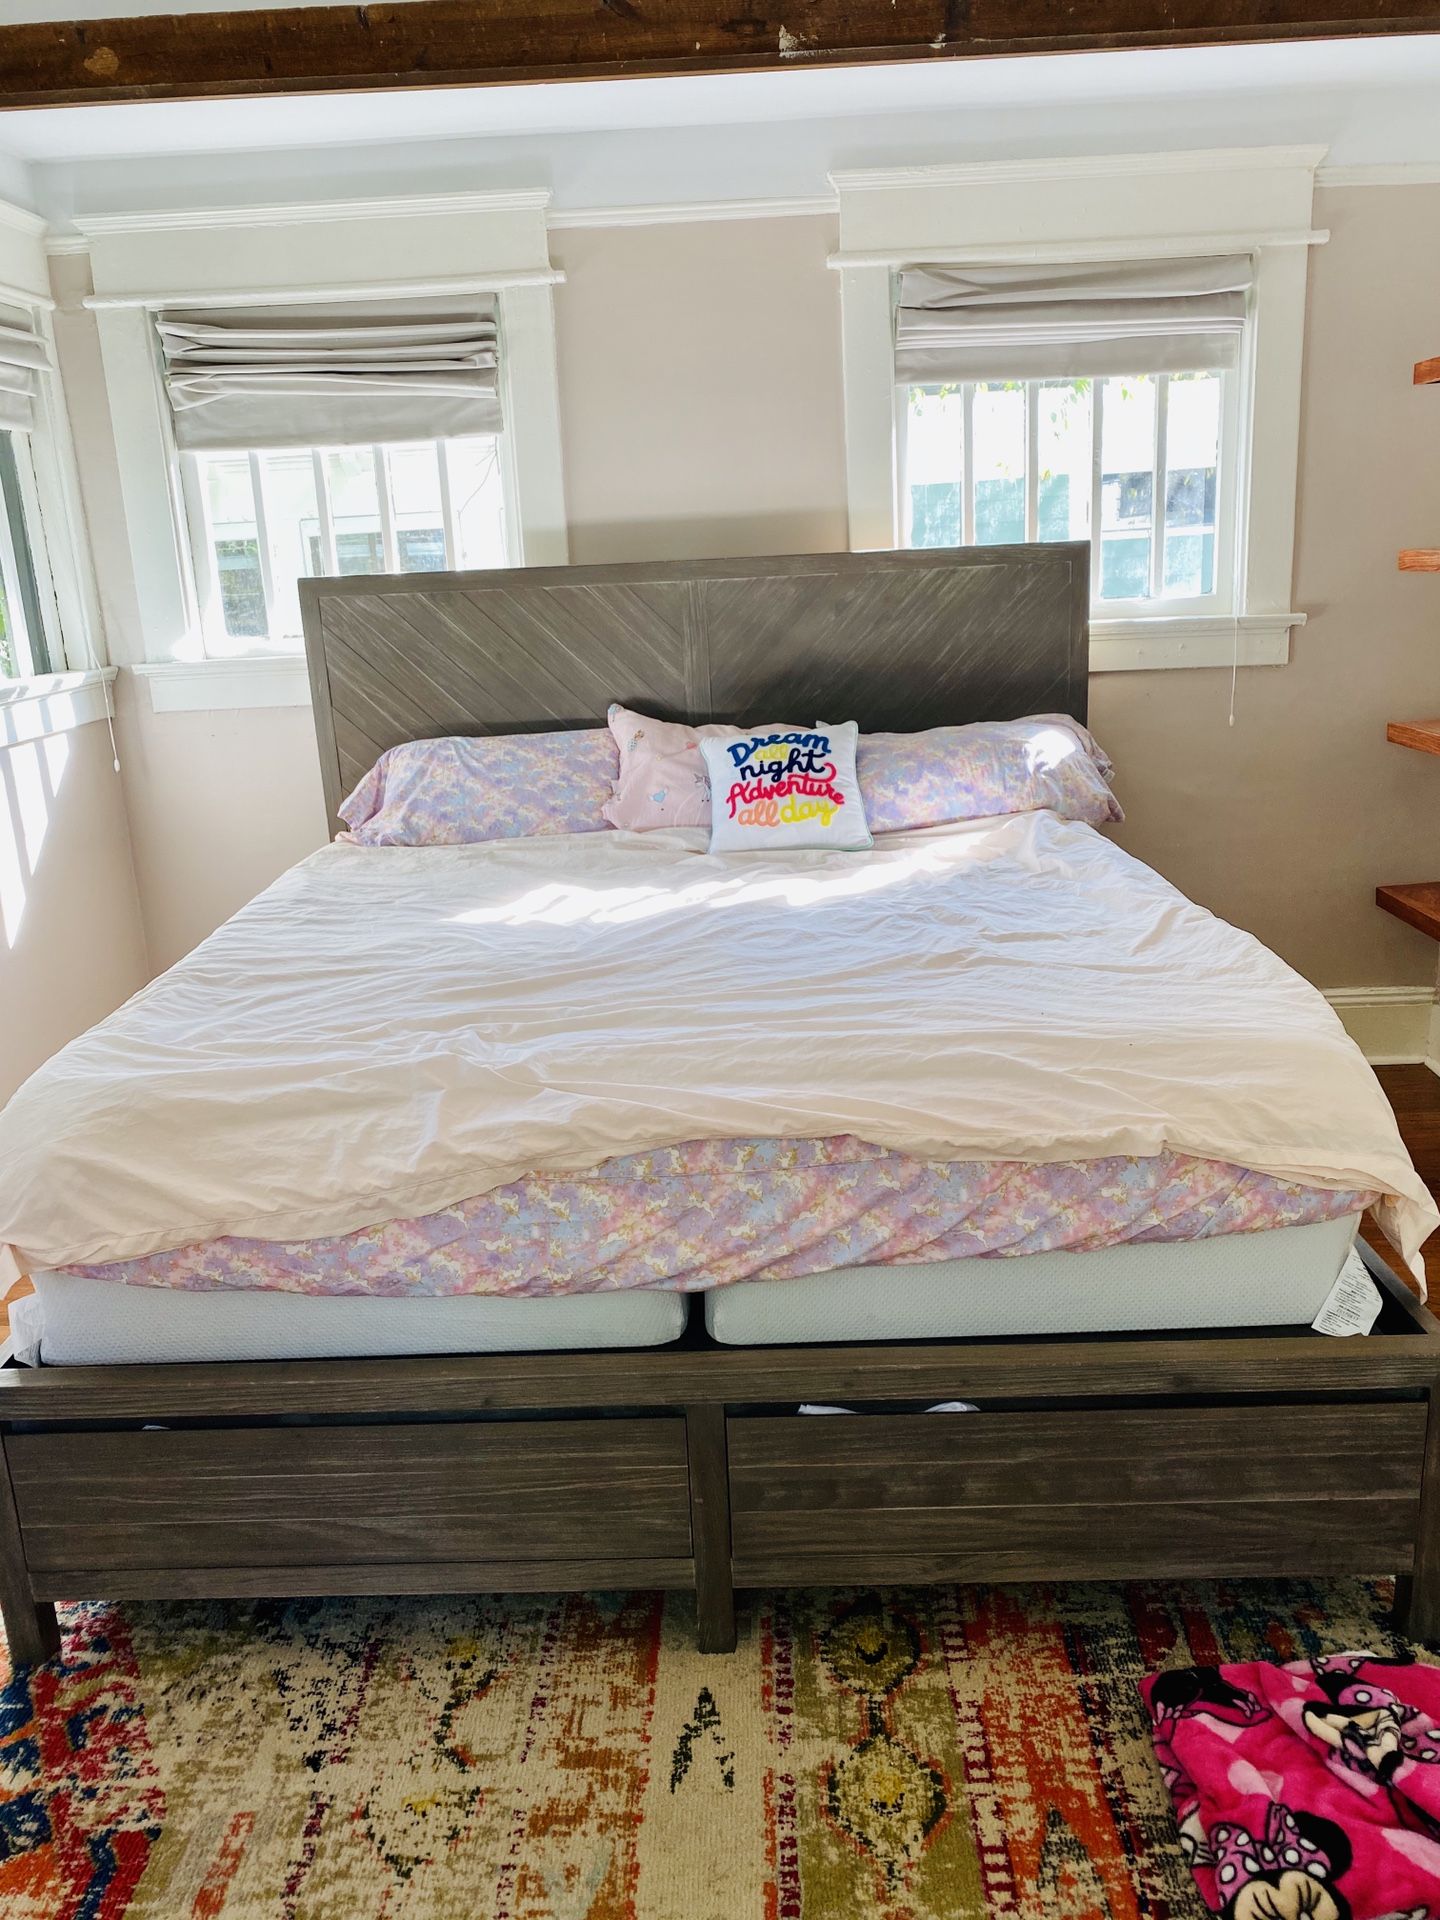 King bed, mattress, frame, and box springs